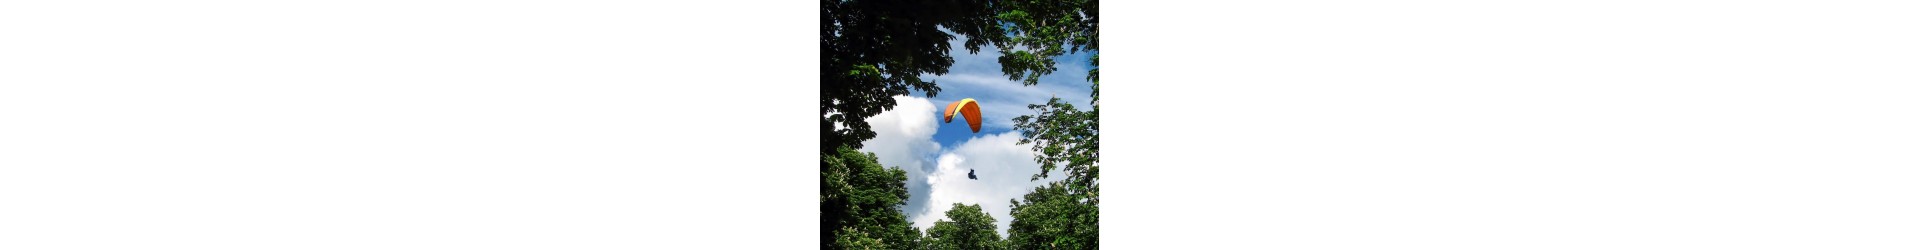 Paragliding Adventure: A Heavenly Journey of Freedom and Spectacular Views